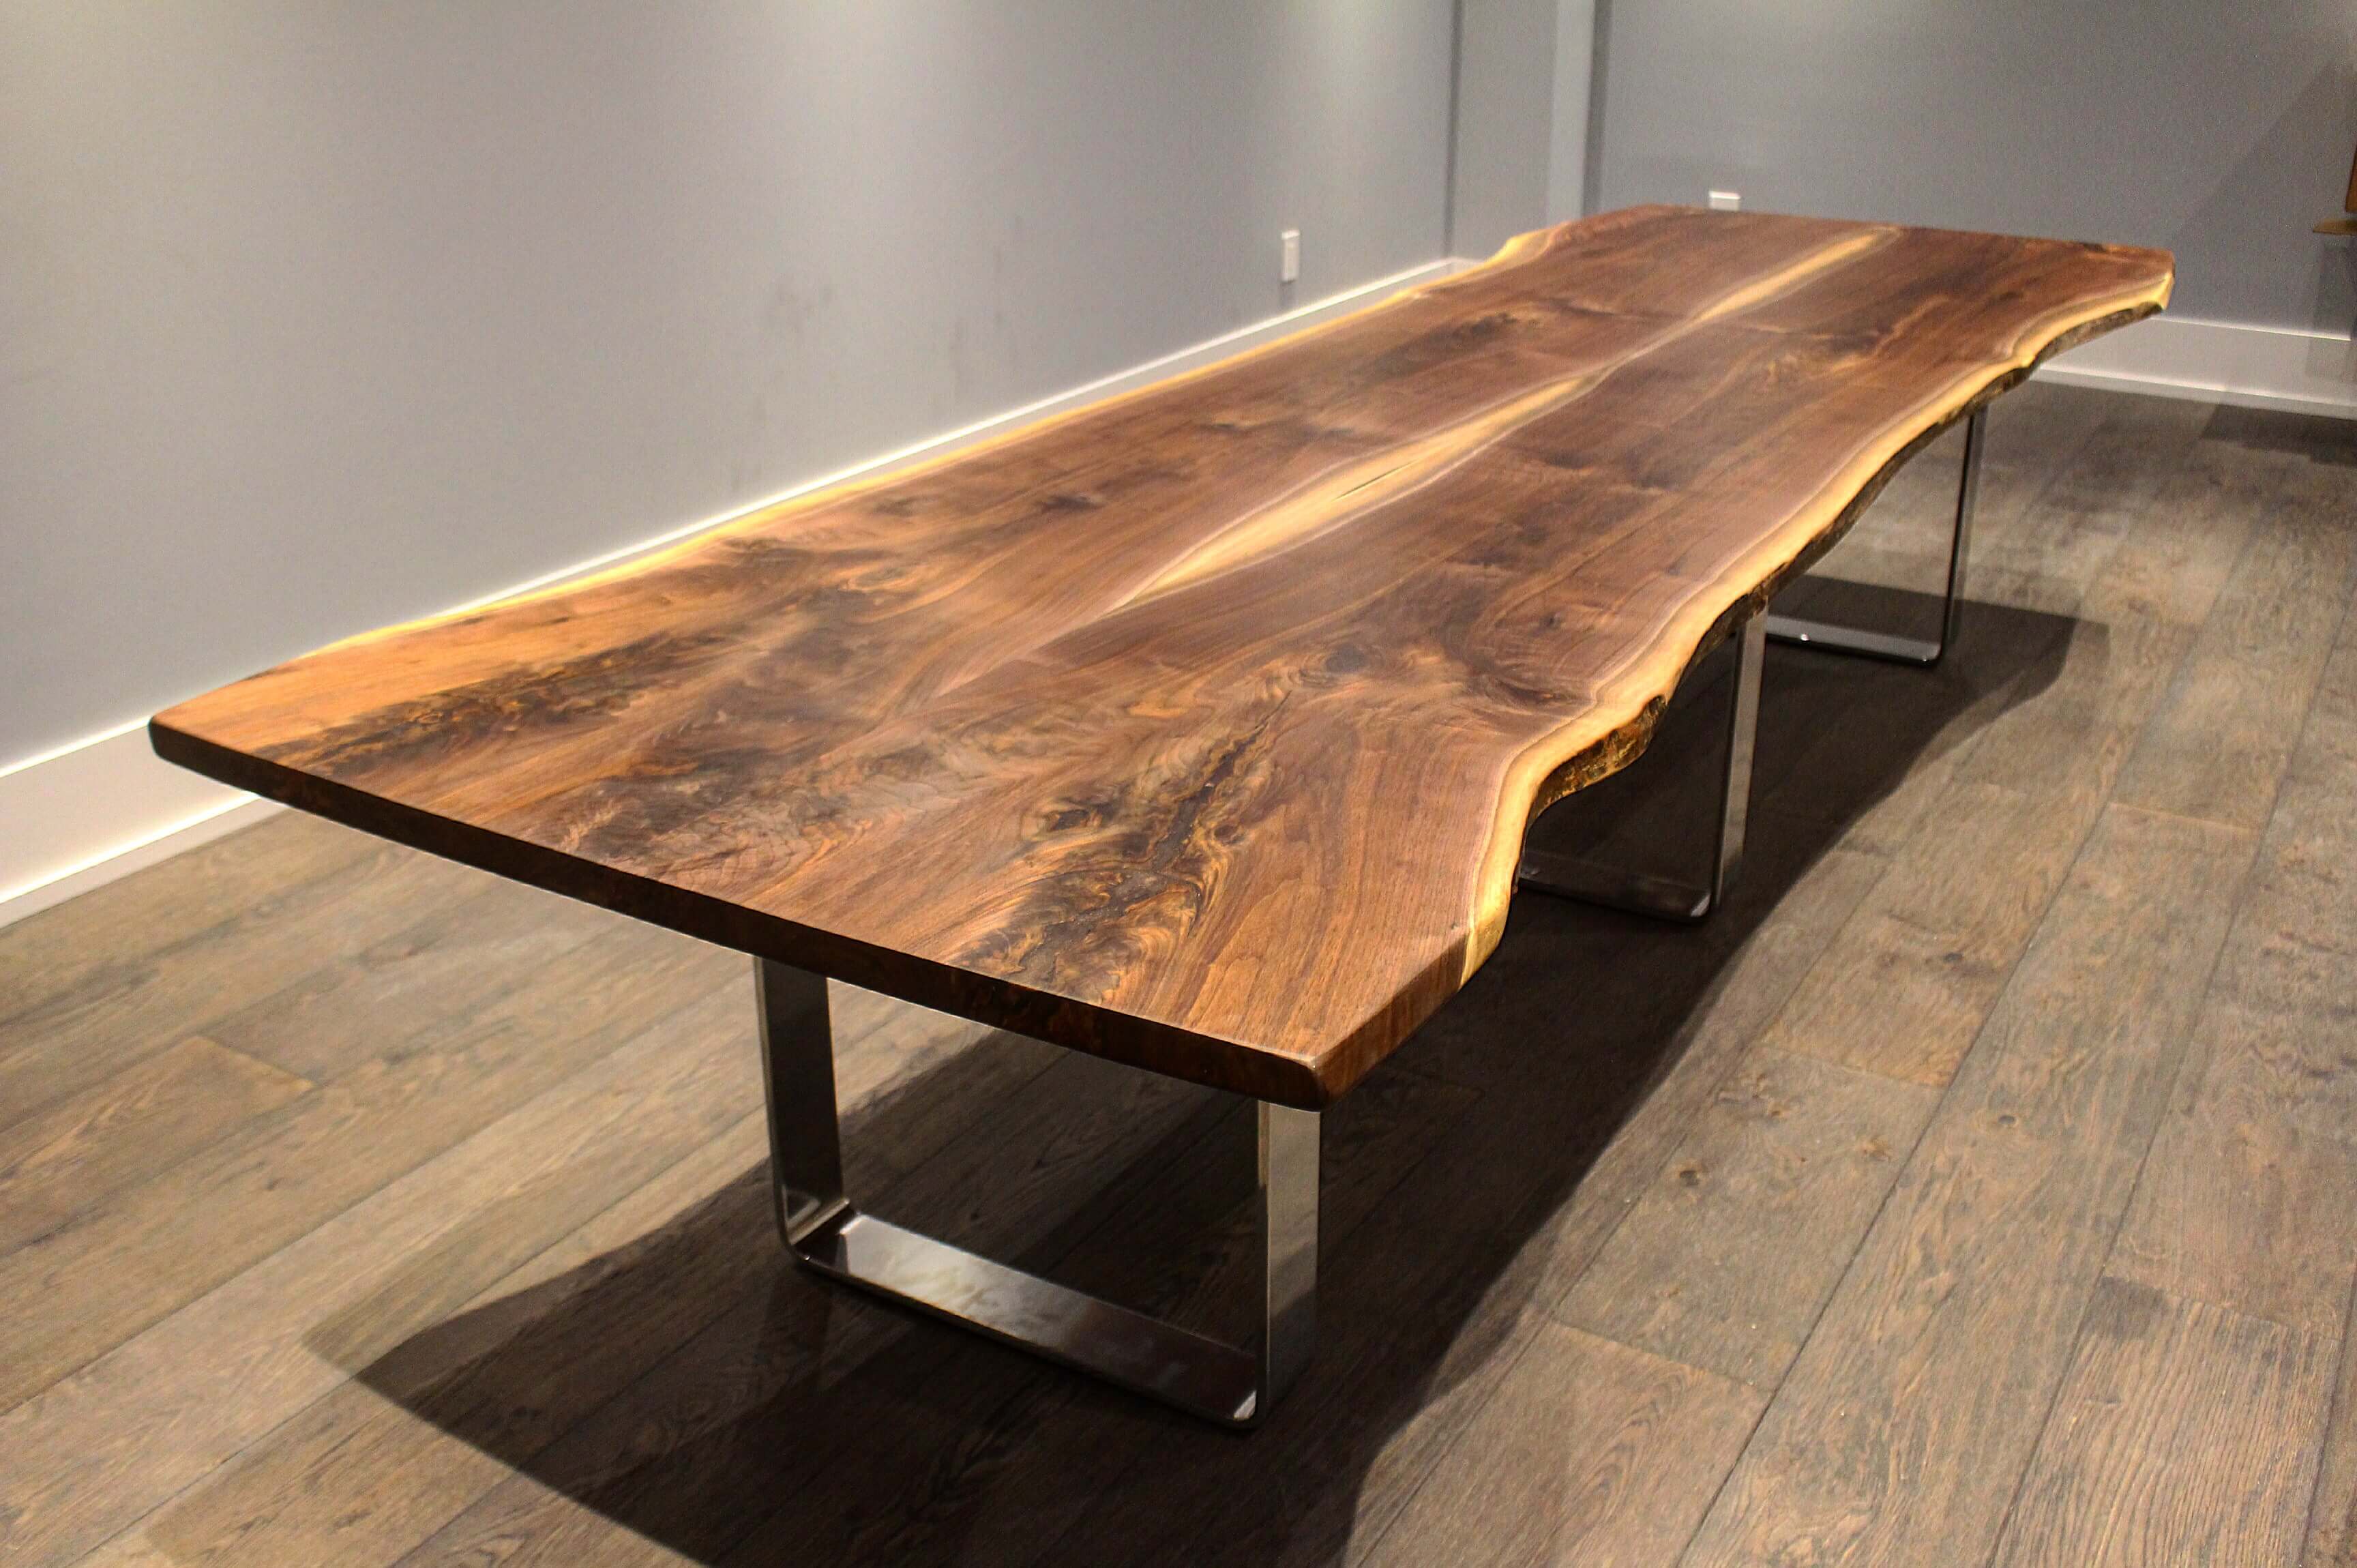 14' live edge black walnut table for New York City client